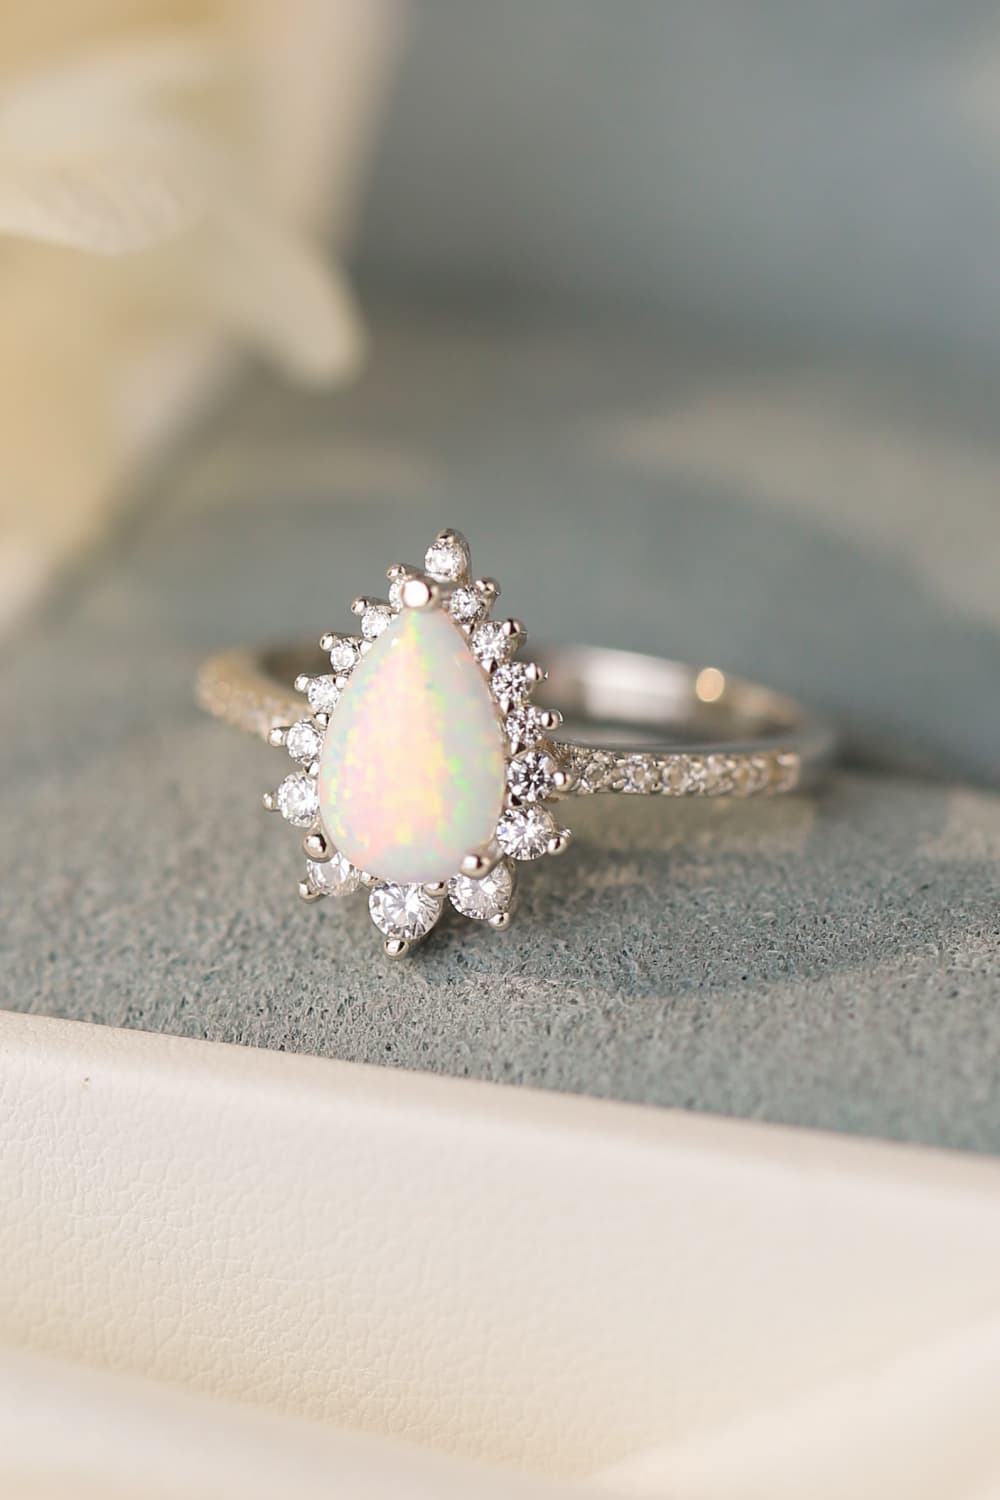 925 Sterling Silver Opal Pear Shape Ring with Zircon Accents - Platinum-Plated Luxury Jewelry from Australia